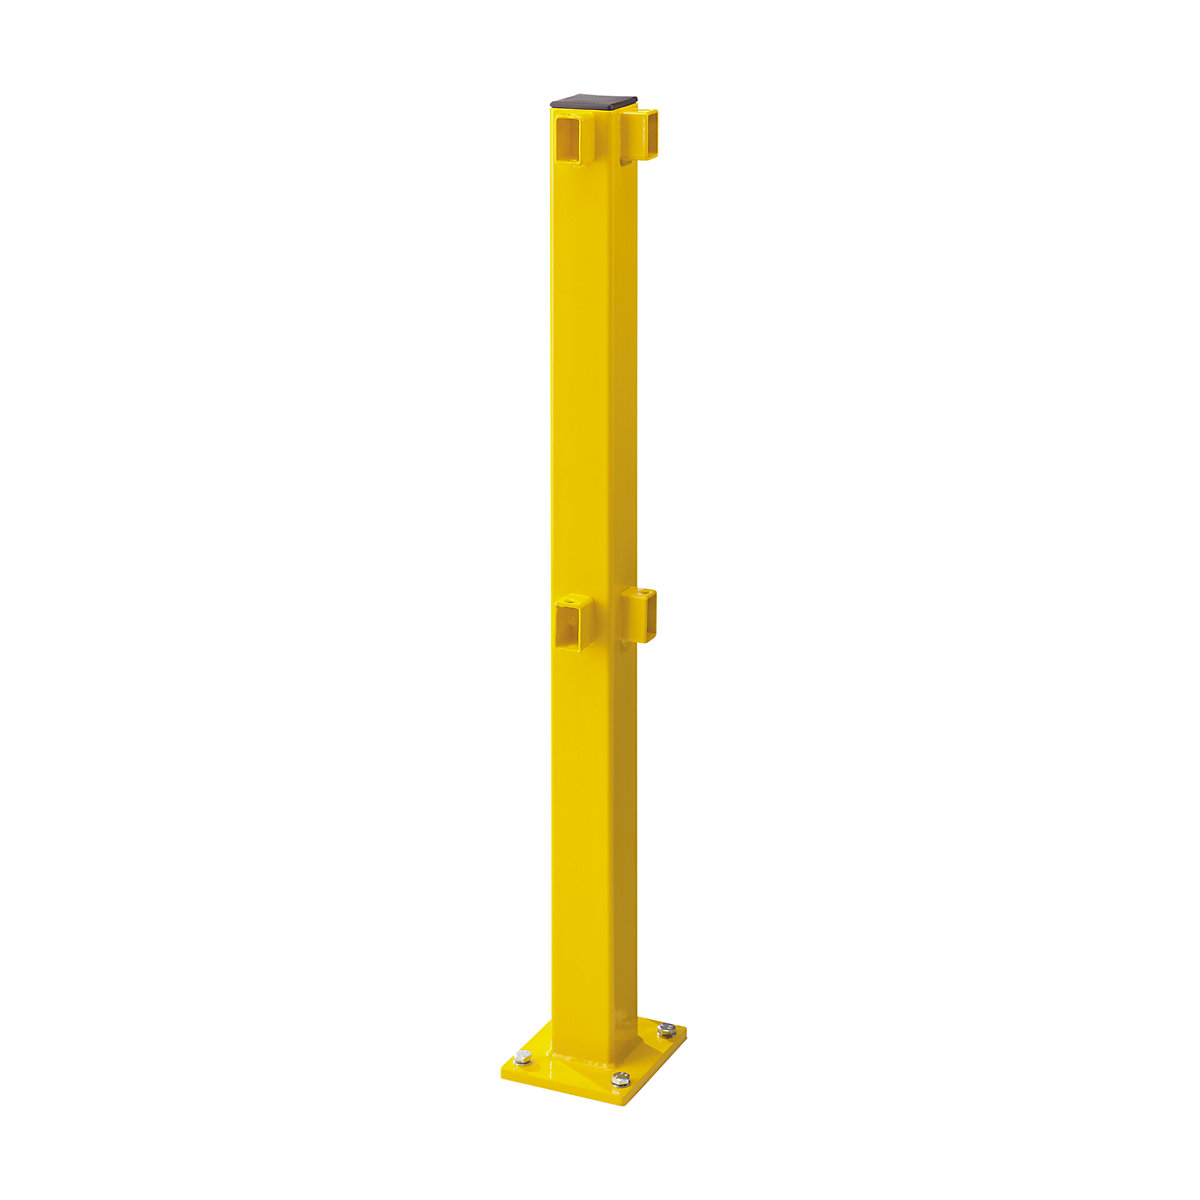 S-Line post for safety railing, for outdoor areas, corner post-4